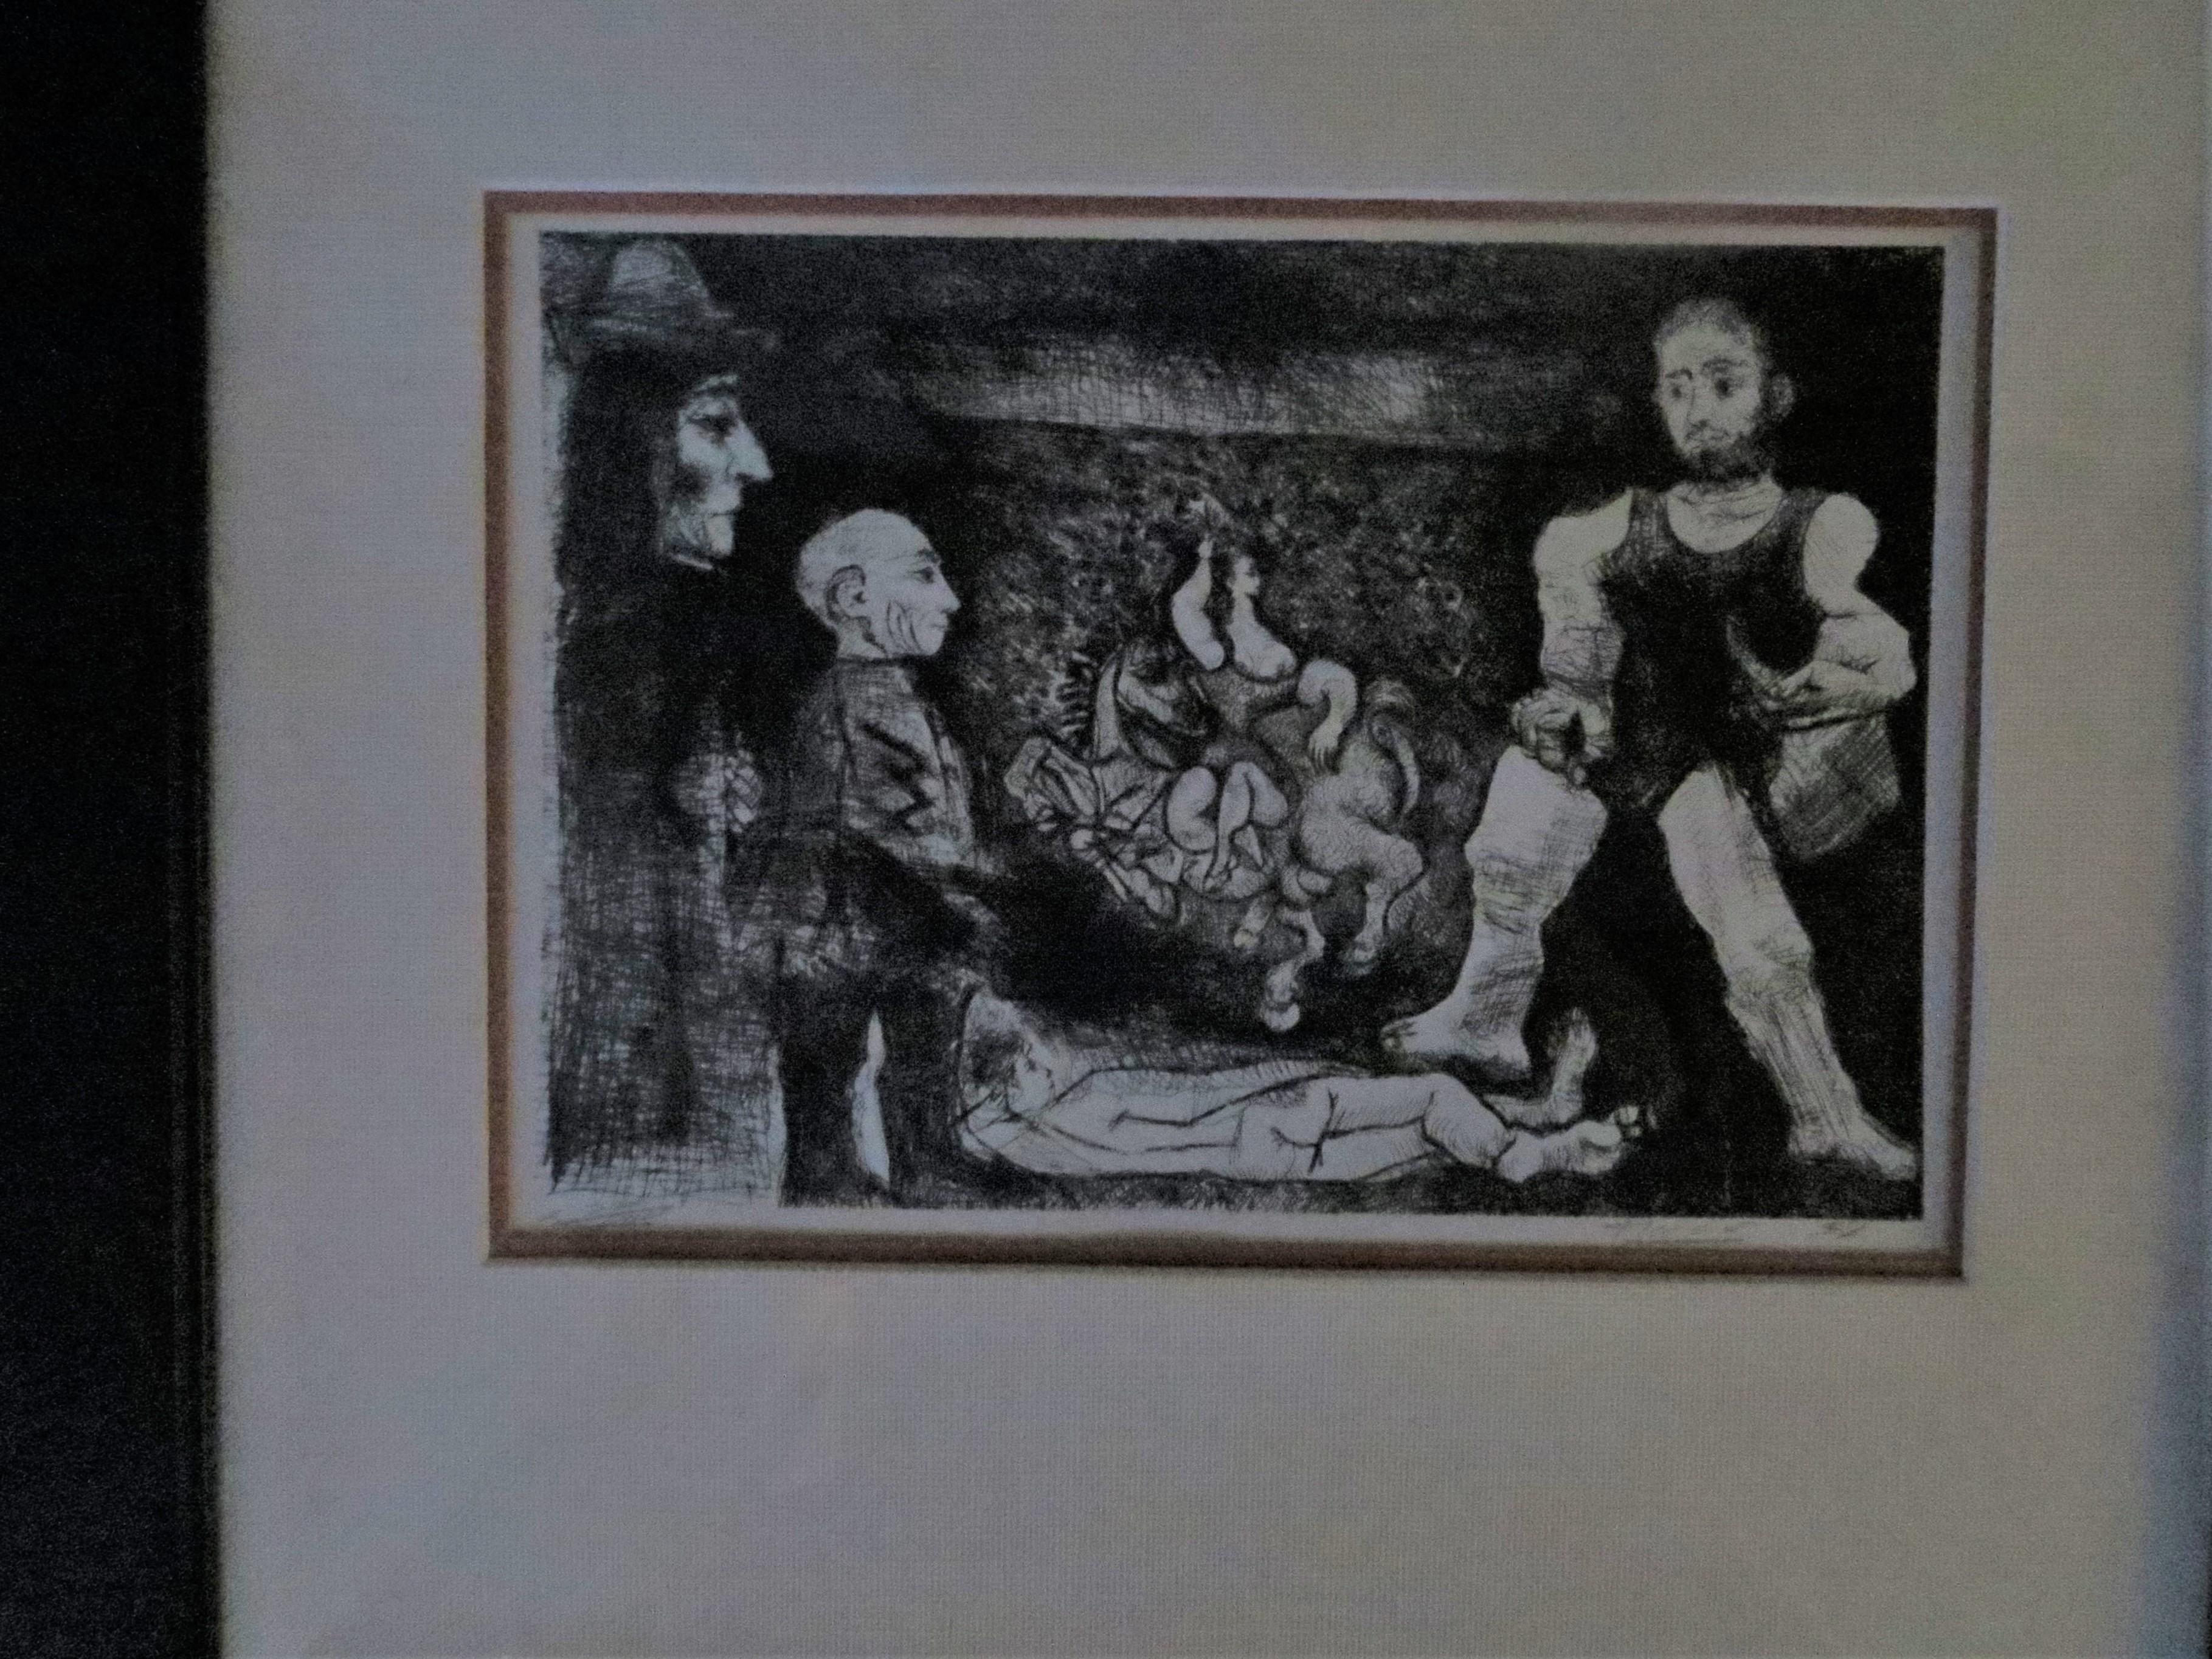 Engraving Signed and numbered date 1958
The first attempts at engraving date from 1905. Picasso, 